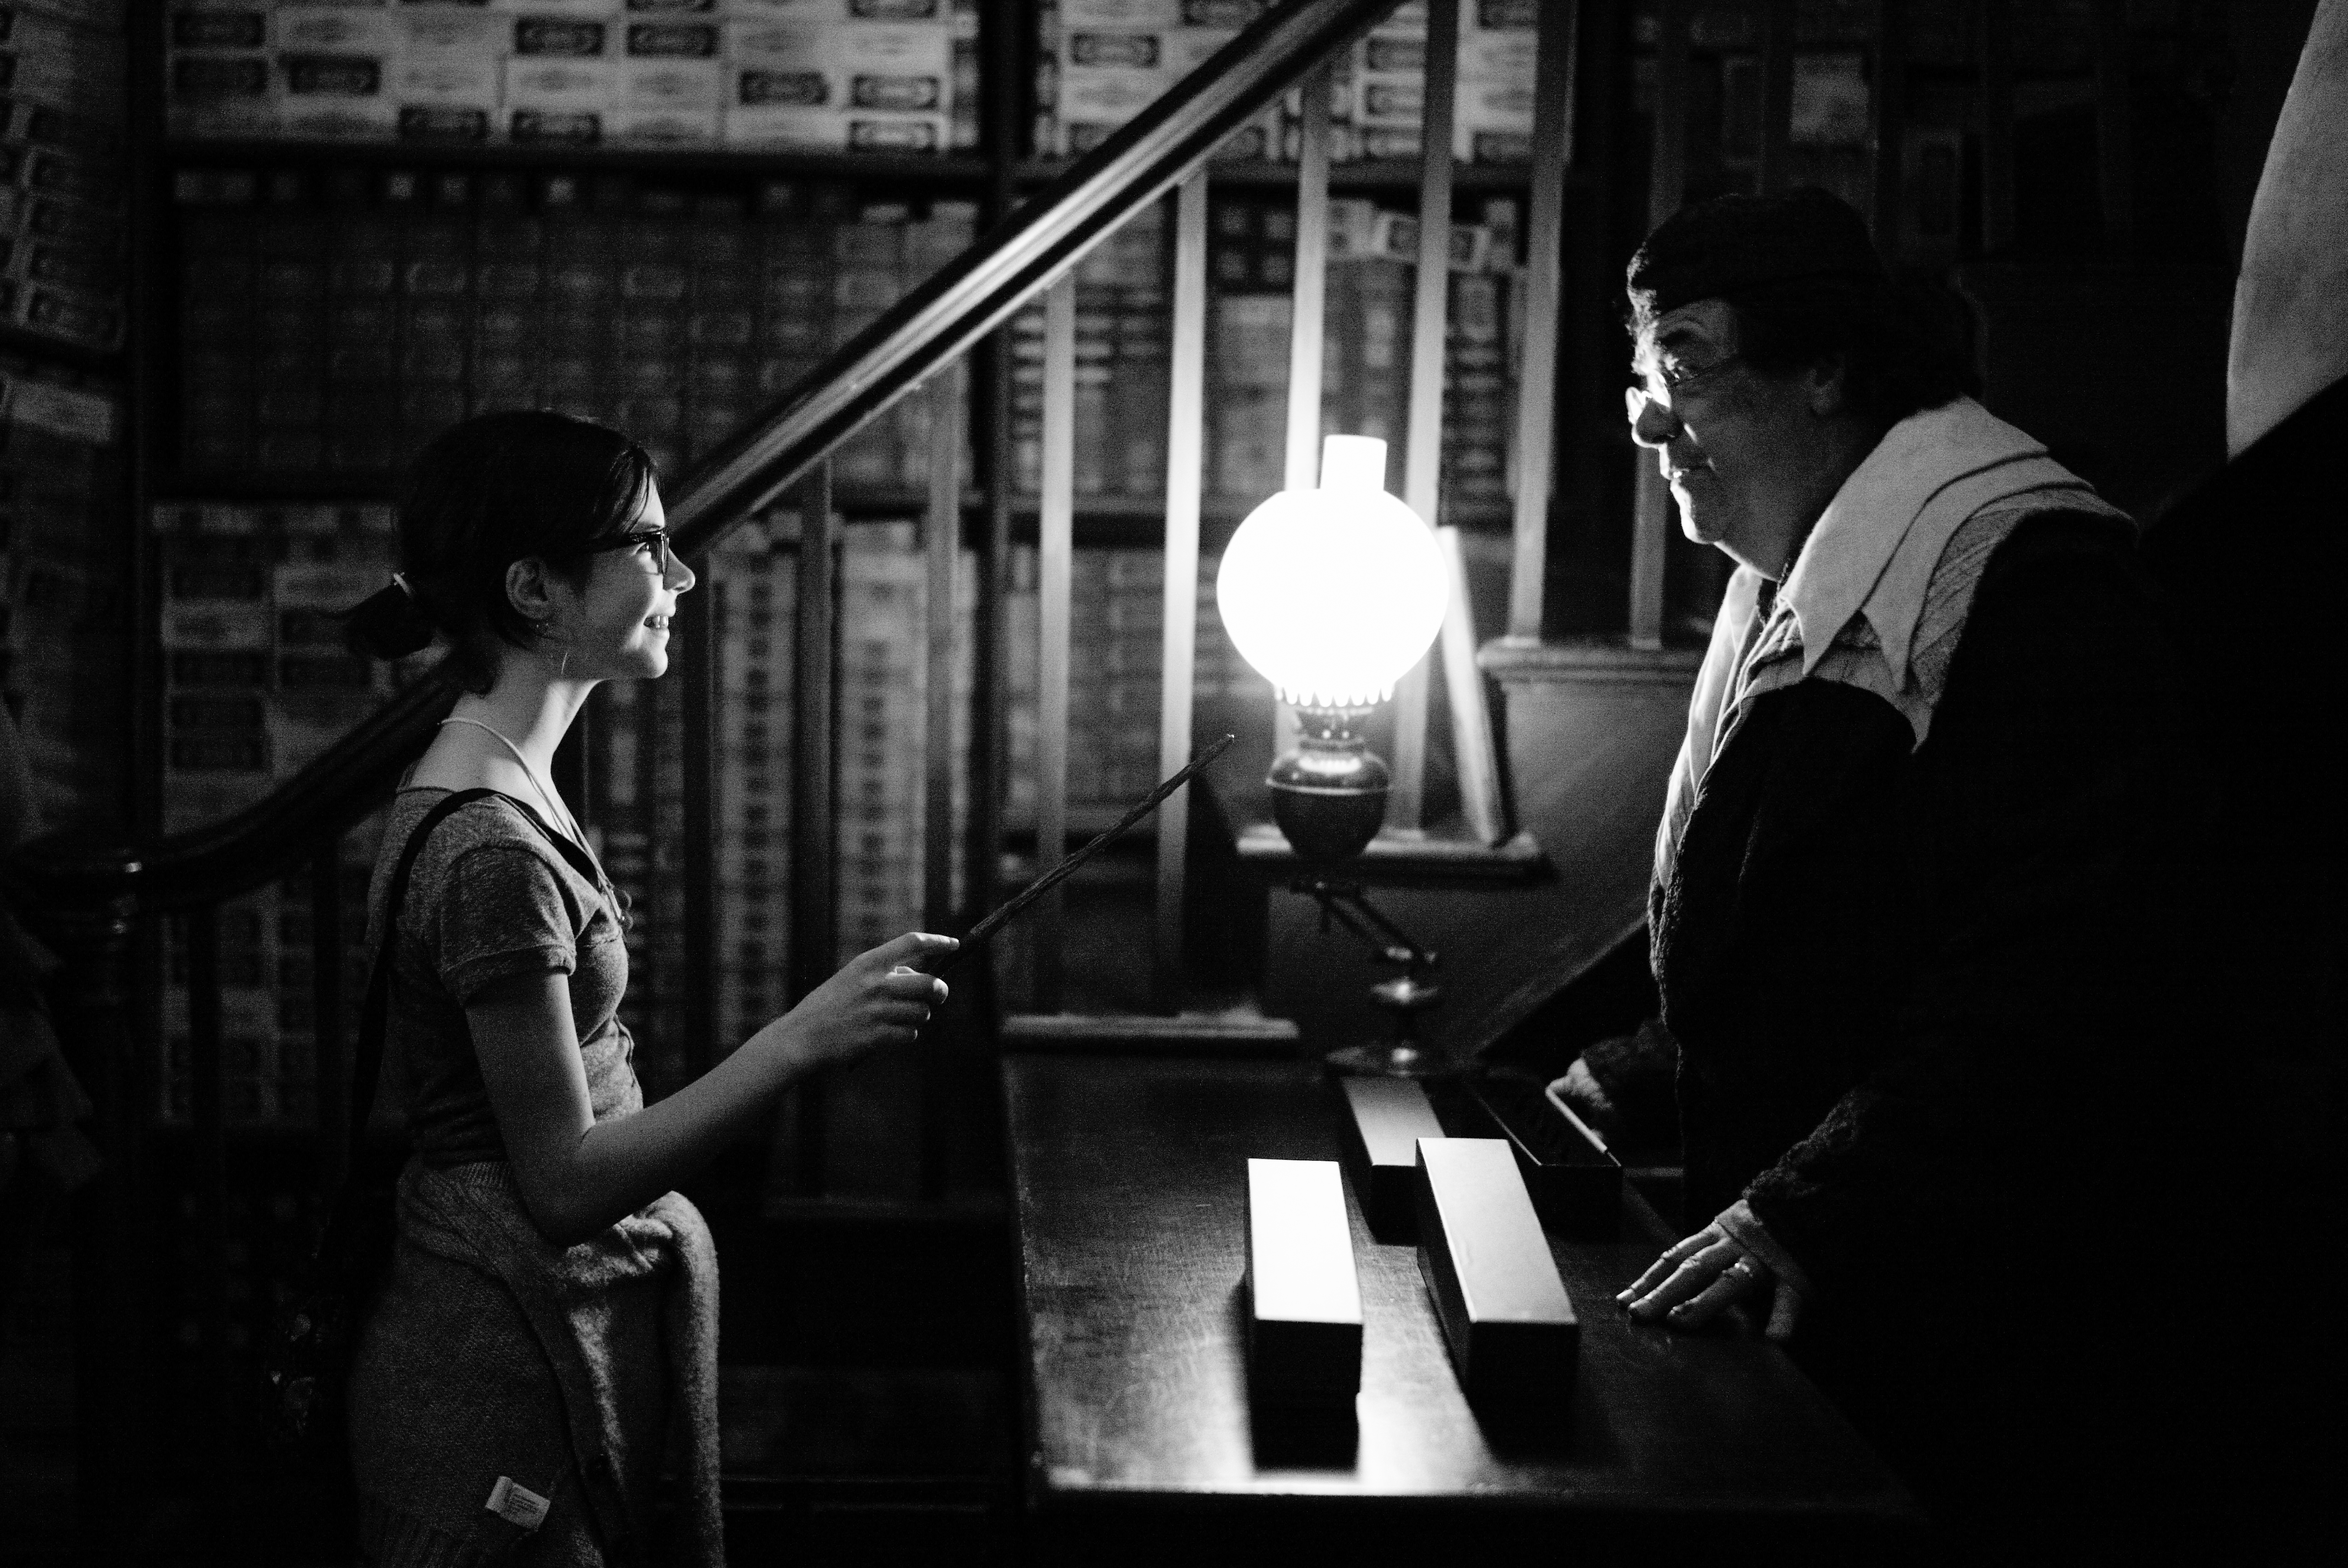 Guest receiving a magic wand at Diagon Alley, Universal Studios, Orlando, Florida. Leica M-P / Summilux 50mm @ f1.7, 1/45, ISO 4000 JPEG from camera using B&W Neutral setting slightly tweaked for exposure.